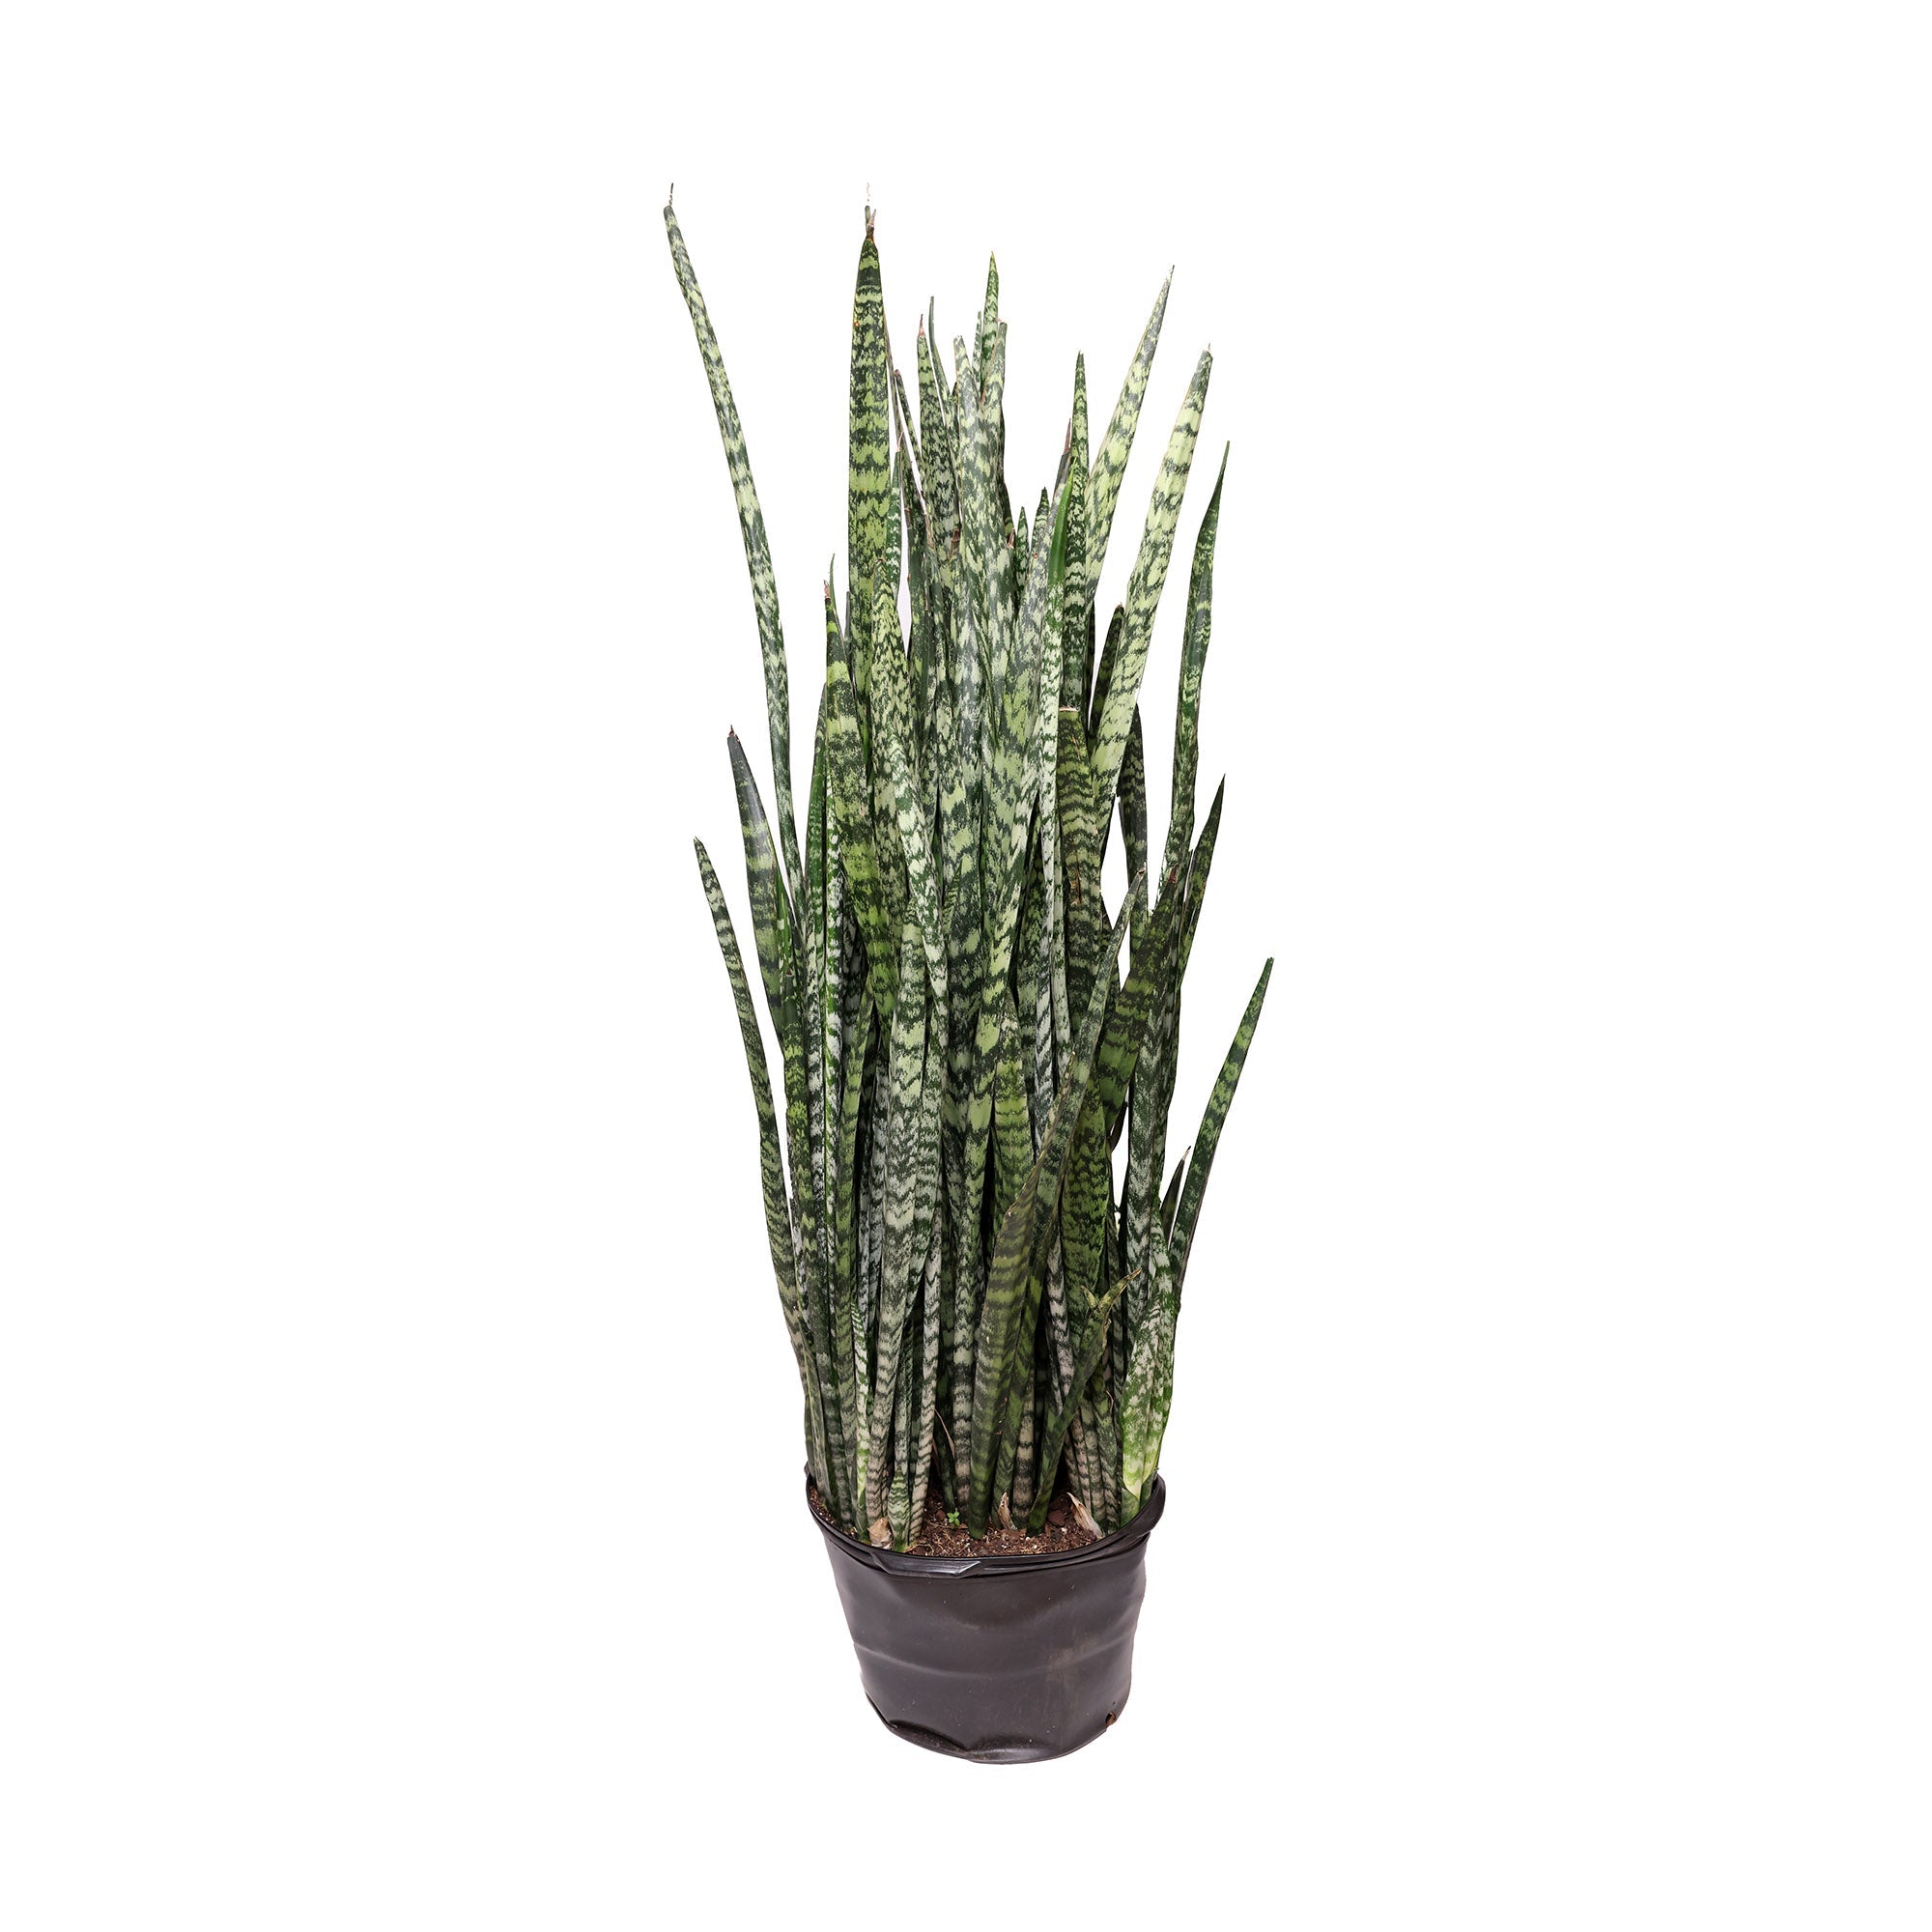 A Snake Plant Zeylanica 14 Inches, also known as cylindrical snake plant, with long, upright, cylindrical leaves, in a brown pot isolated on a white background by Chive Studio 2024.